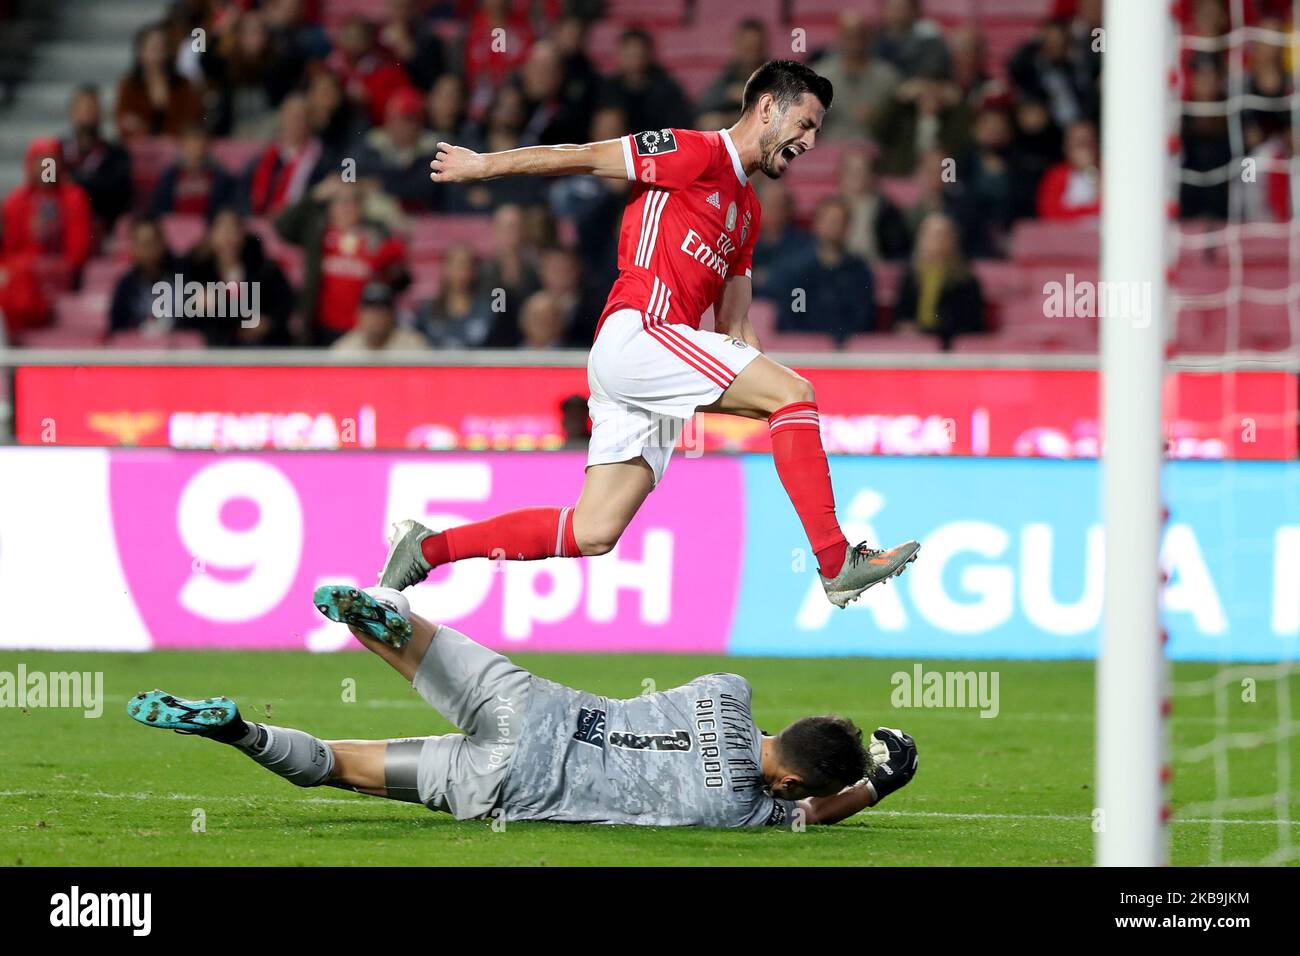 Pizzi of SL Benfica (up) vies with Ricardo Ferreira of Portimonense SC during the Portuguese League football match between SL Benfica and Portimonense SC at the Luz stadium in Lisbon, Portugal on October 30, 2019. (Photo by Pedro FiÃºza/NurPhoto) Stock Photo